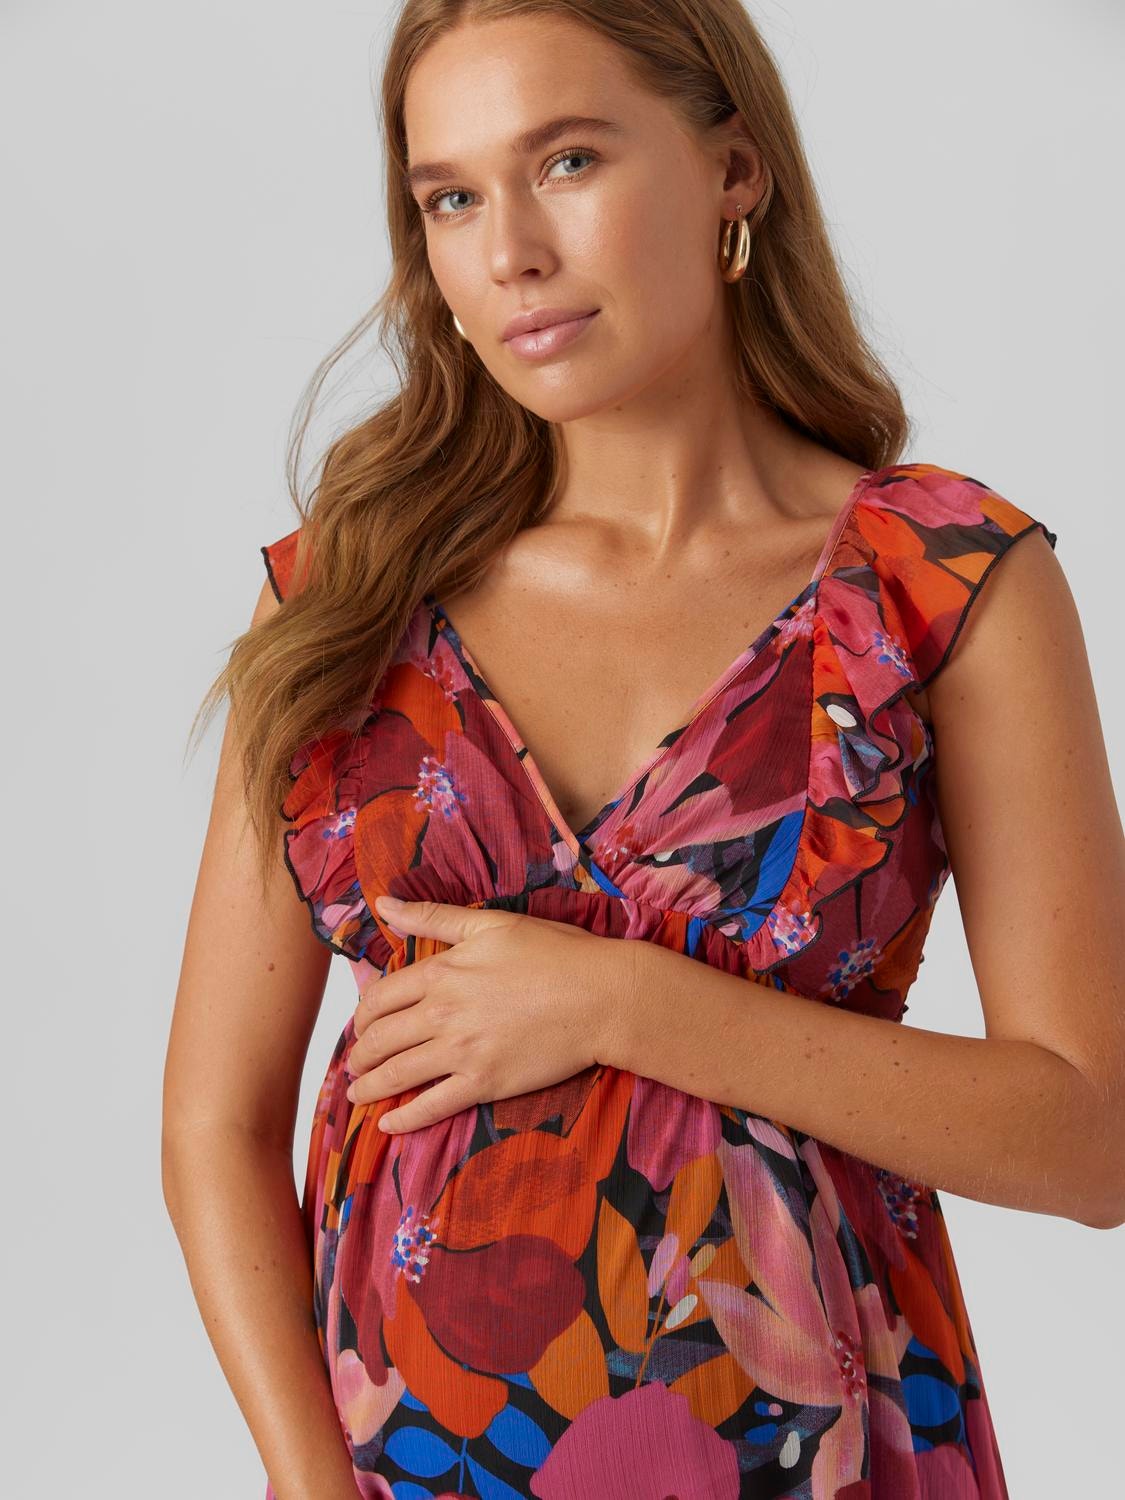 Maternity-dress with 40% discount!